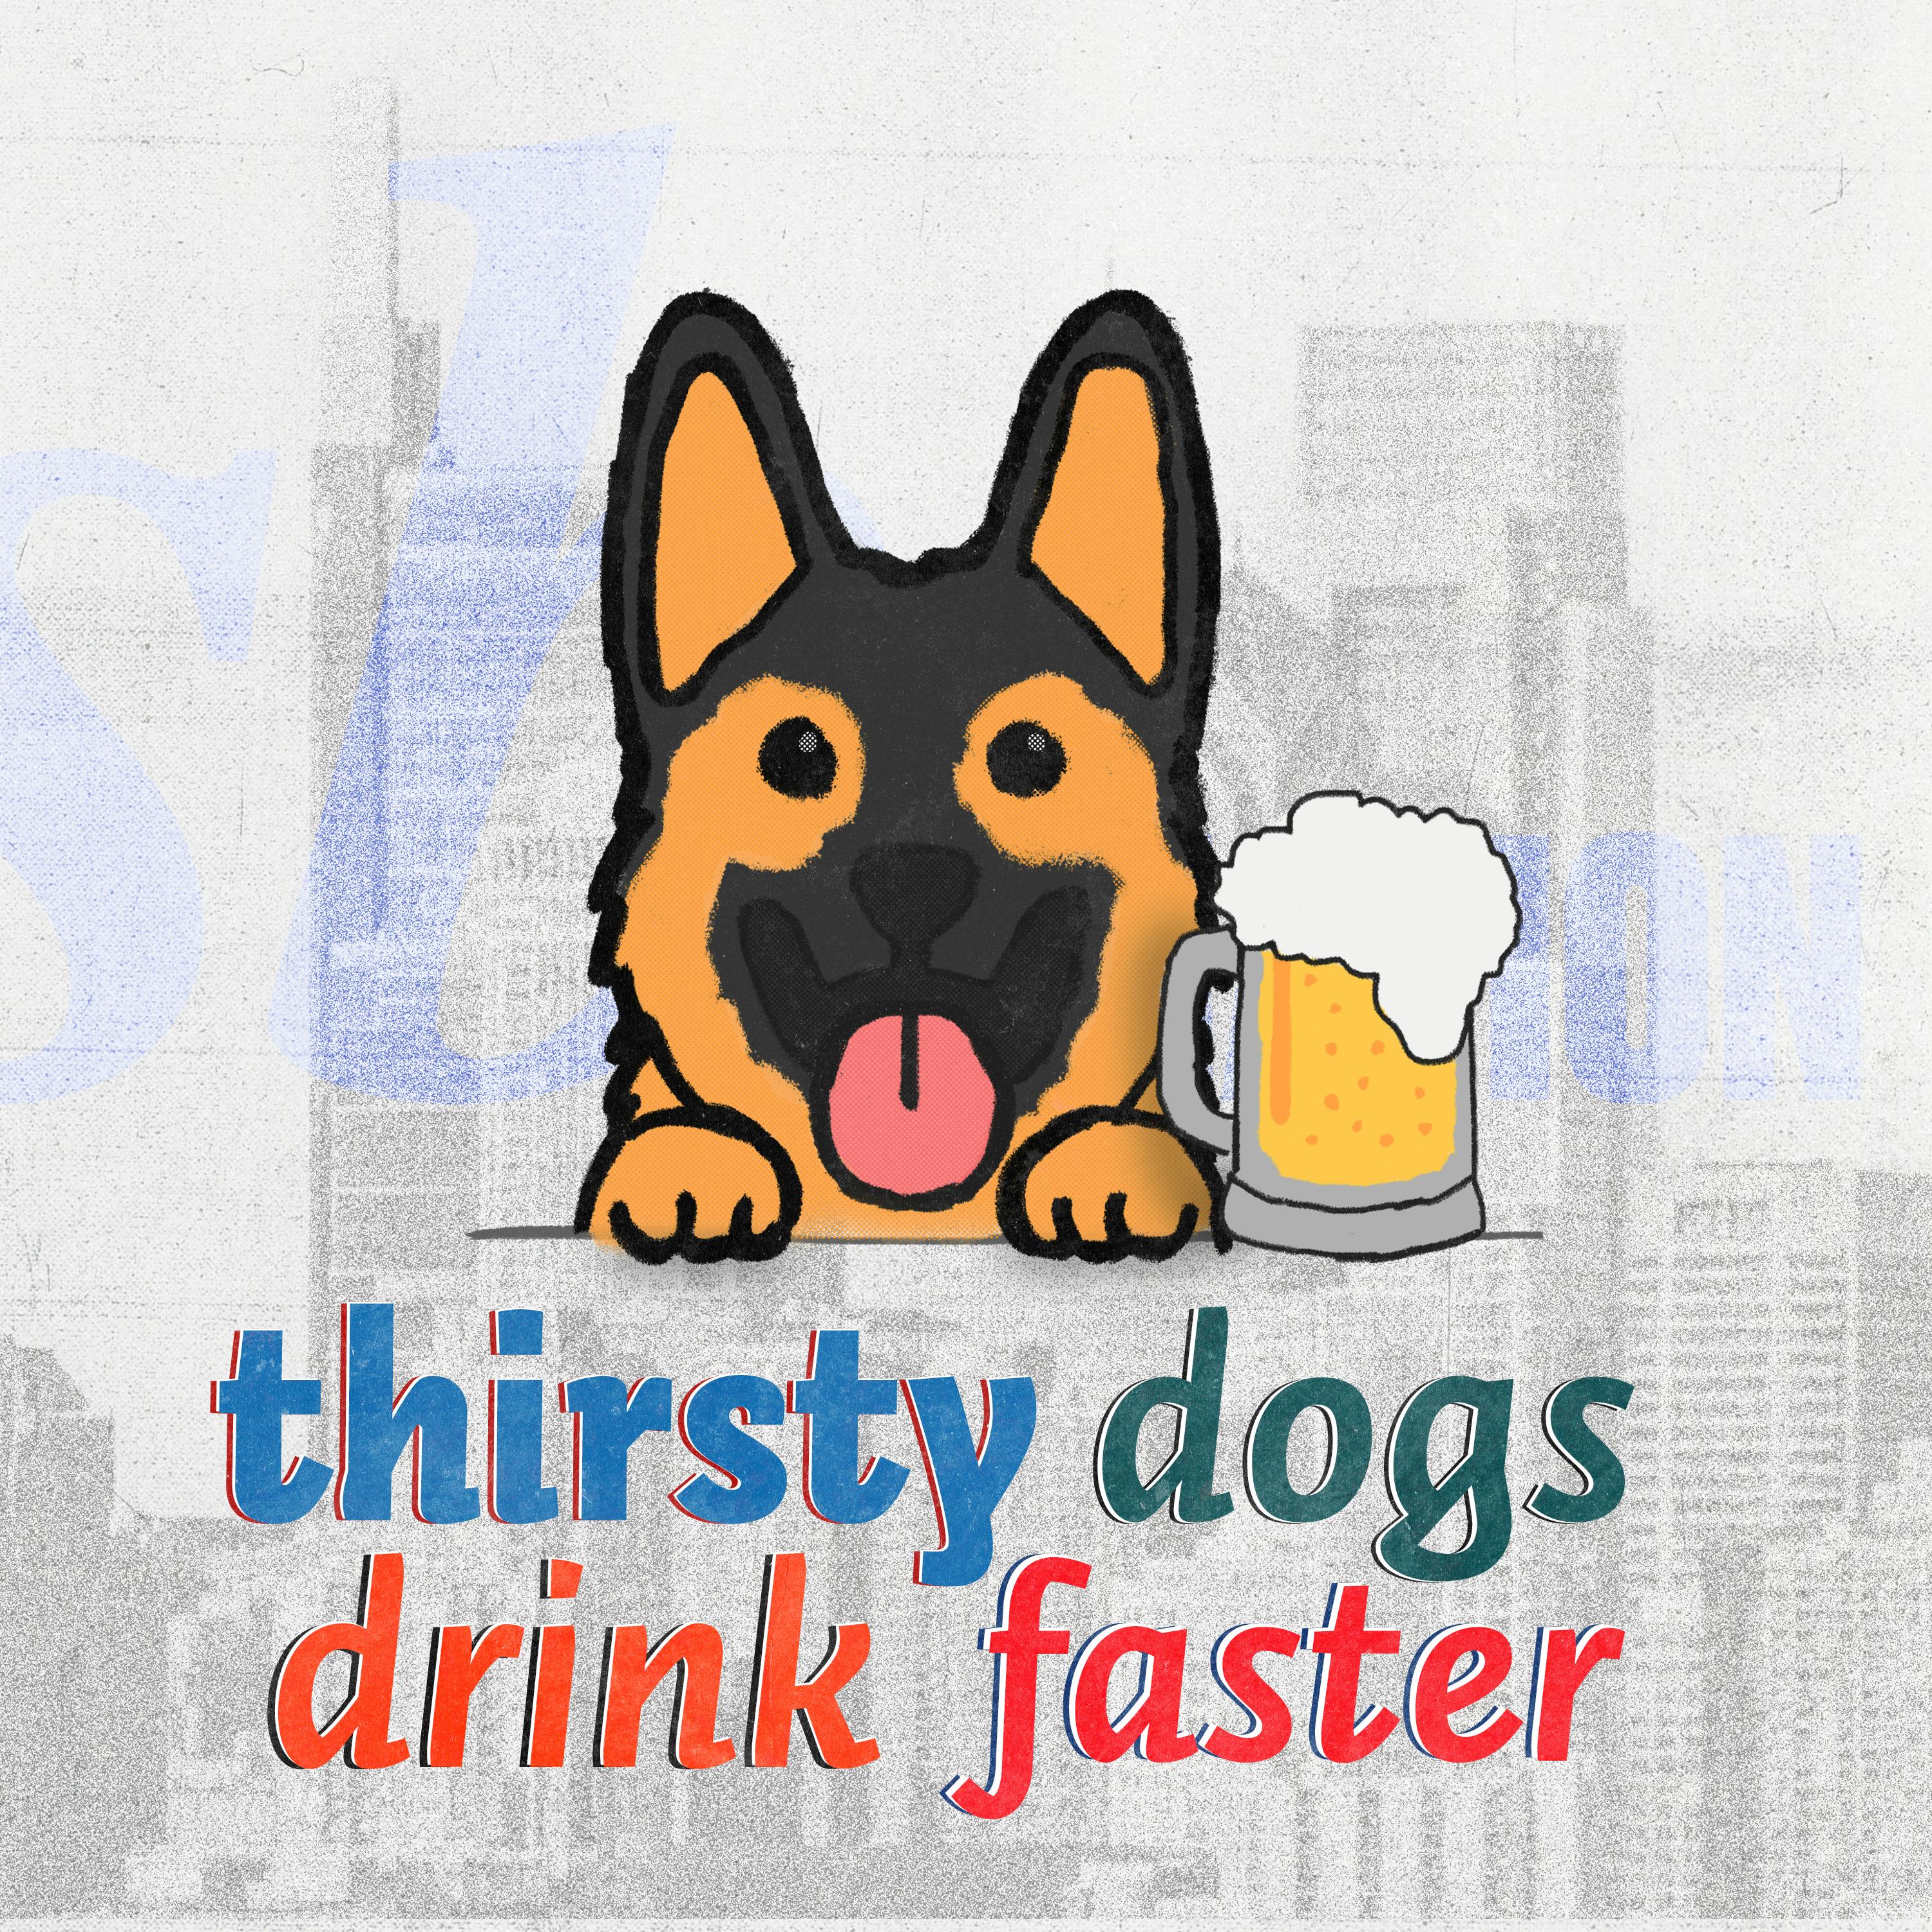 Thirsty Dogs Drink Faster: The Eagles are 3-0 after blowing out the Commanders, the Phillies are marching towards a playoff spot and the Sixers have started training camp. With Paul Hudrick and Shamus